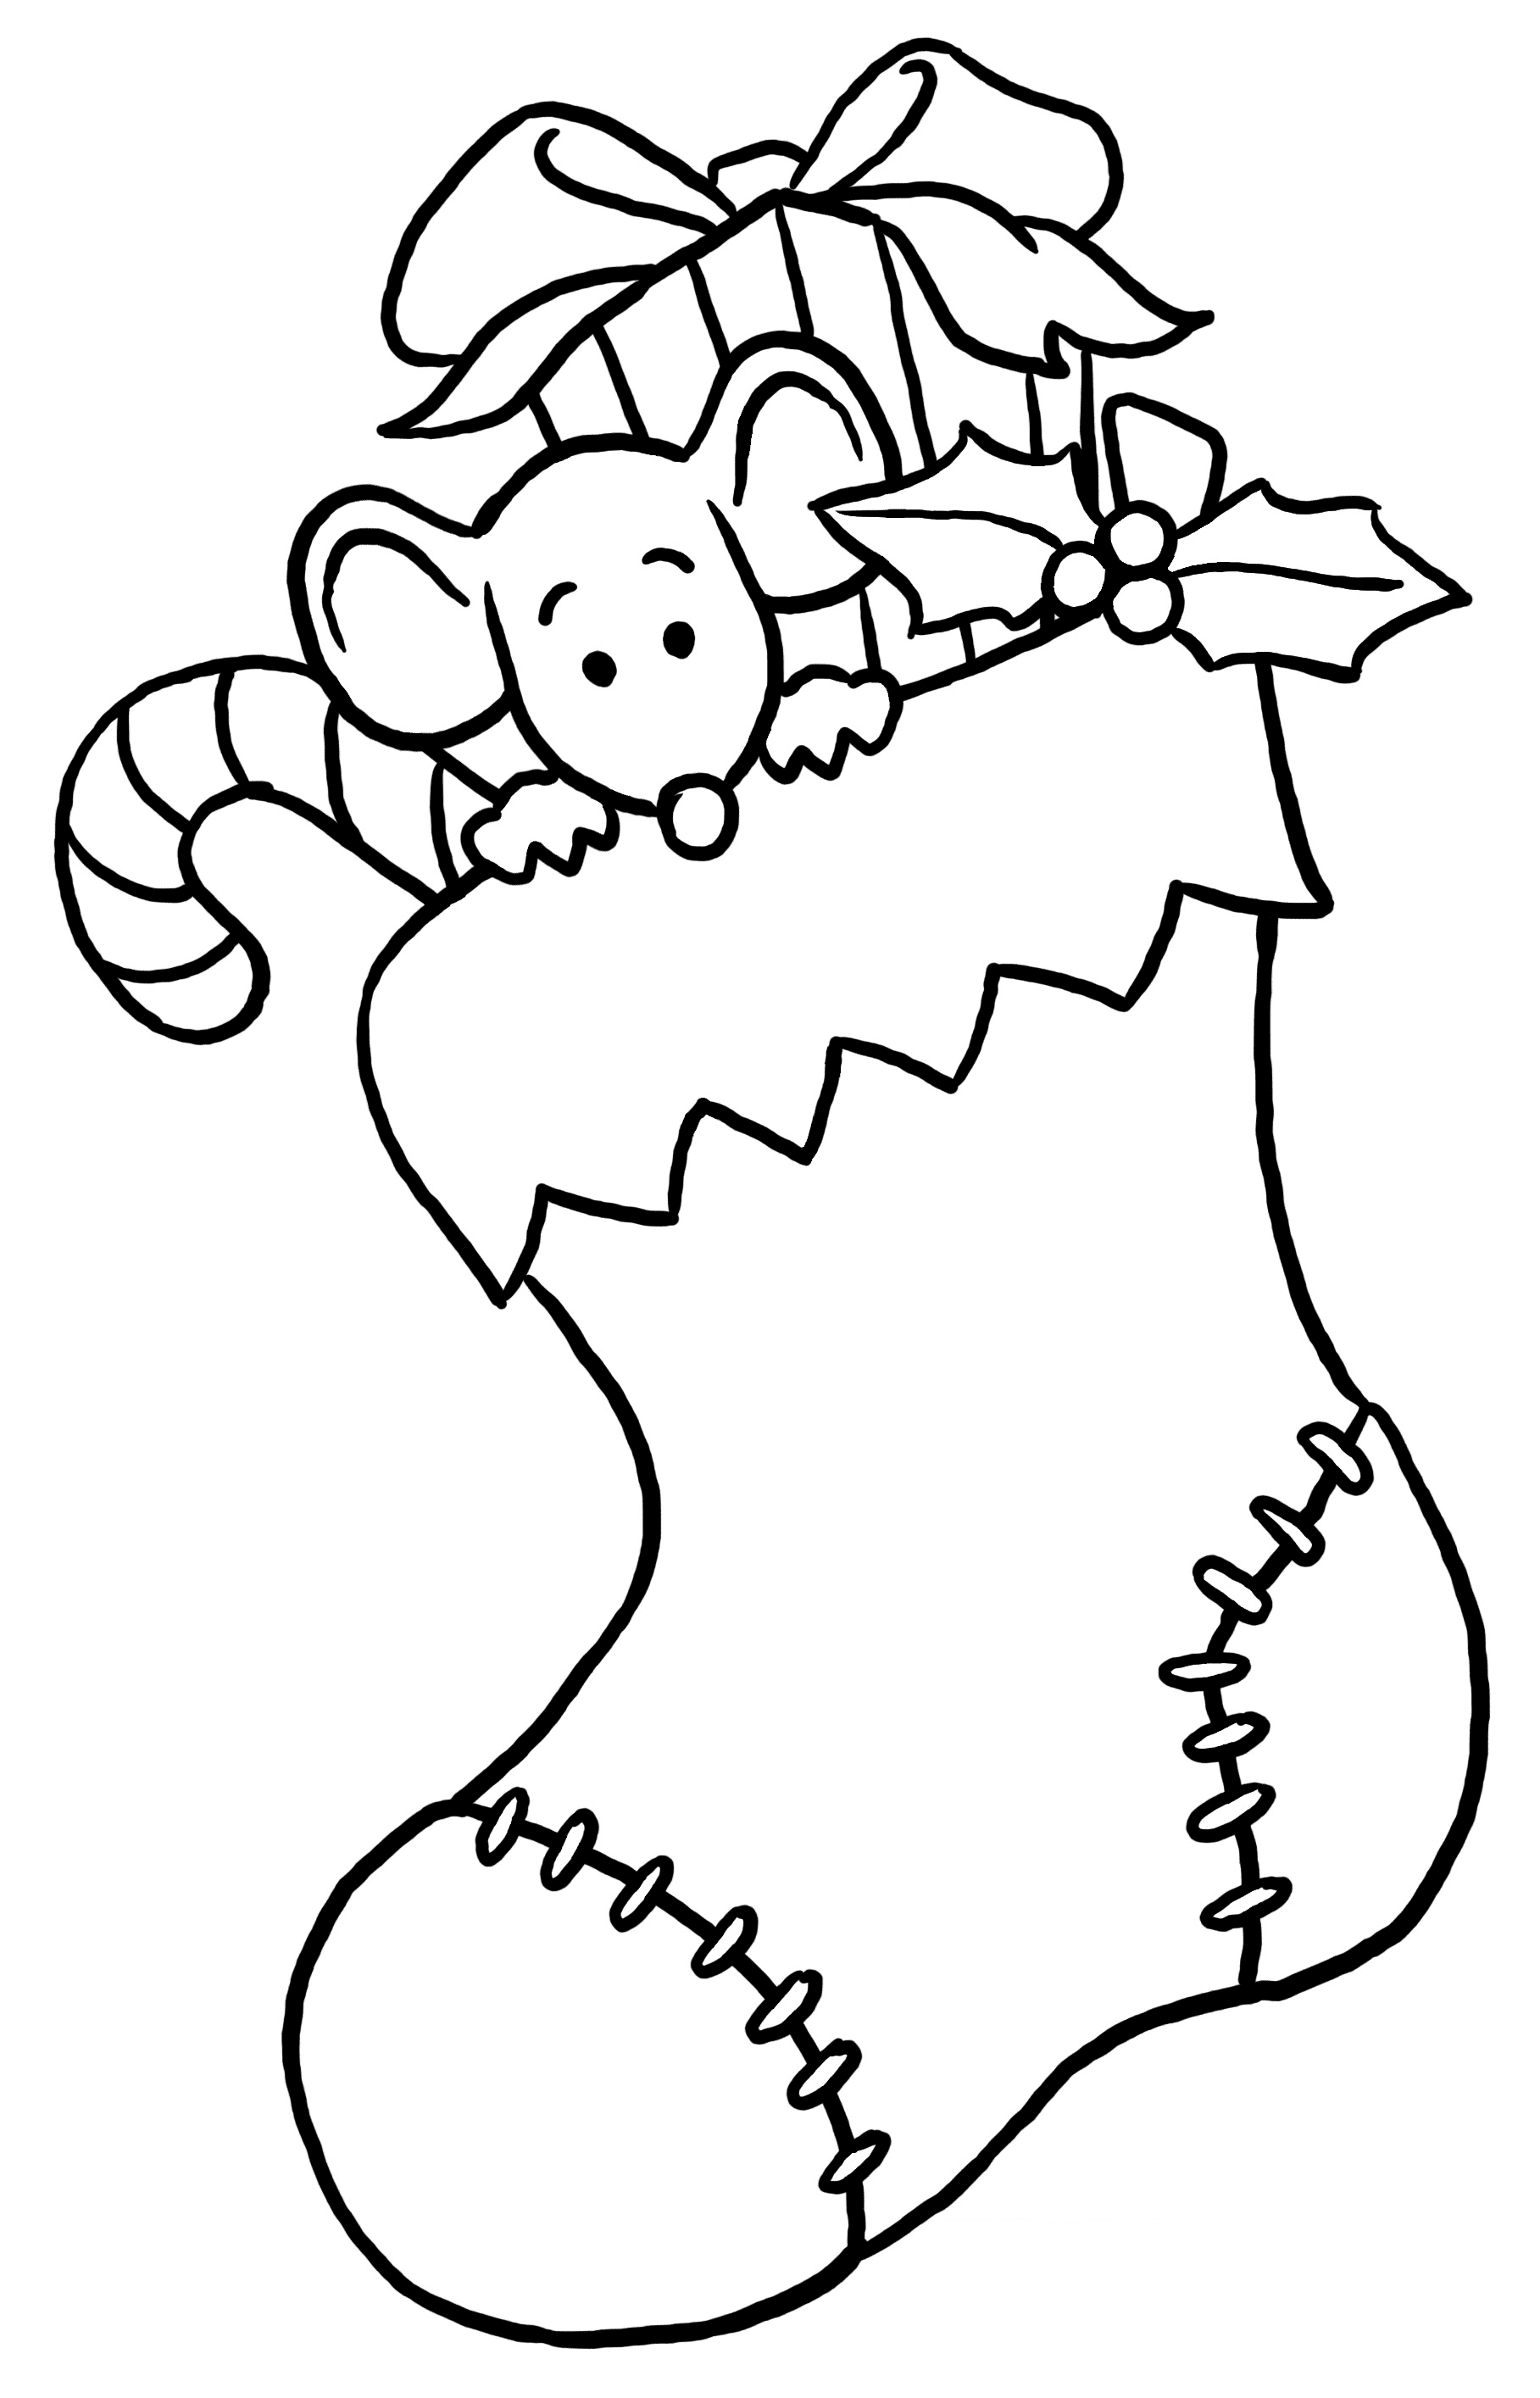 Mouse In Gift Sock Image For Kids Coloring Page